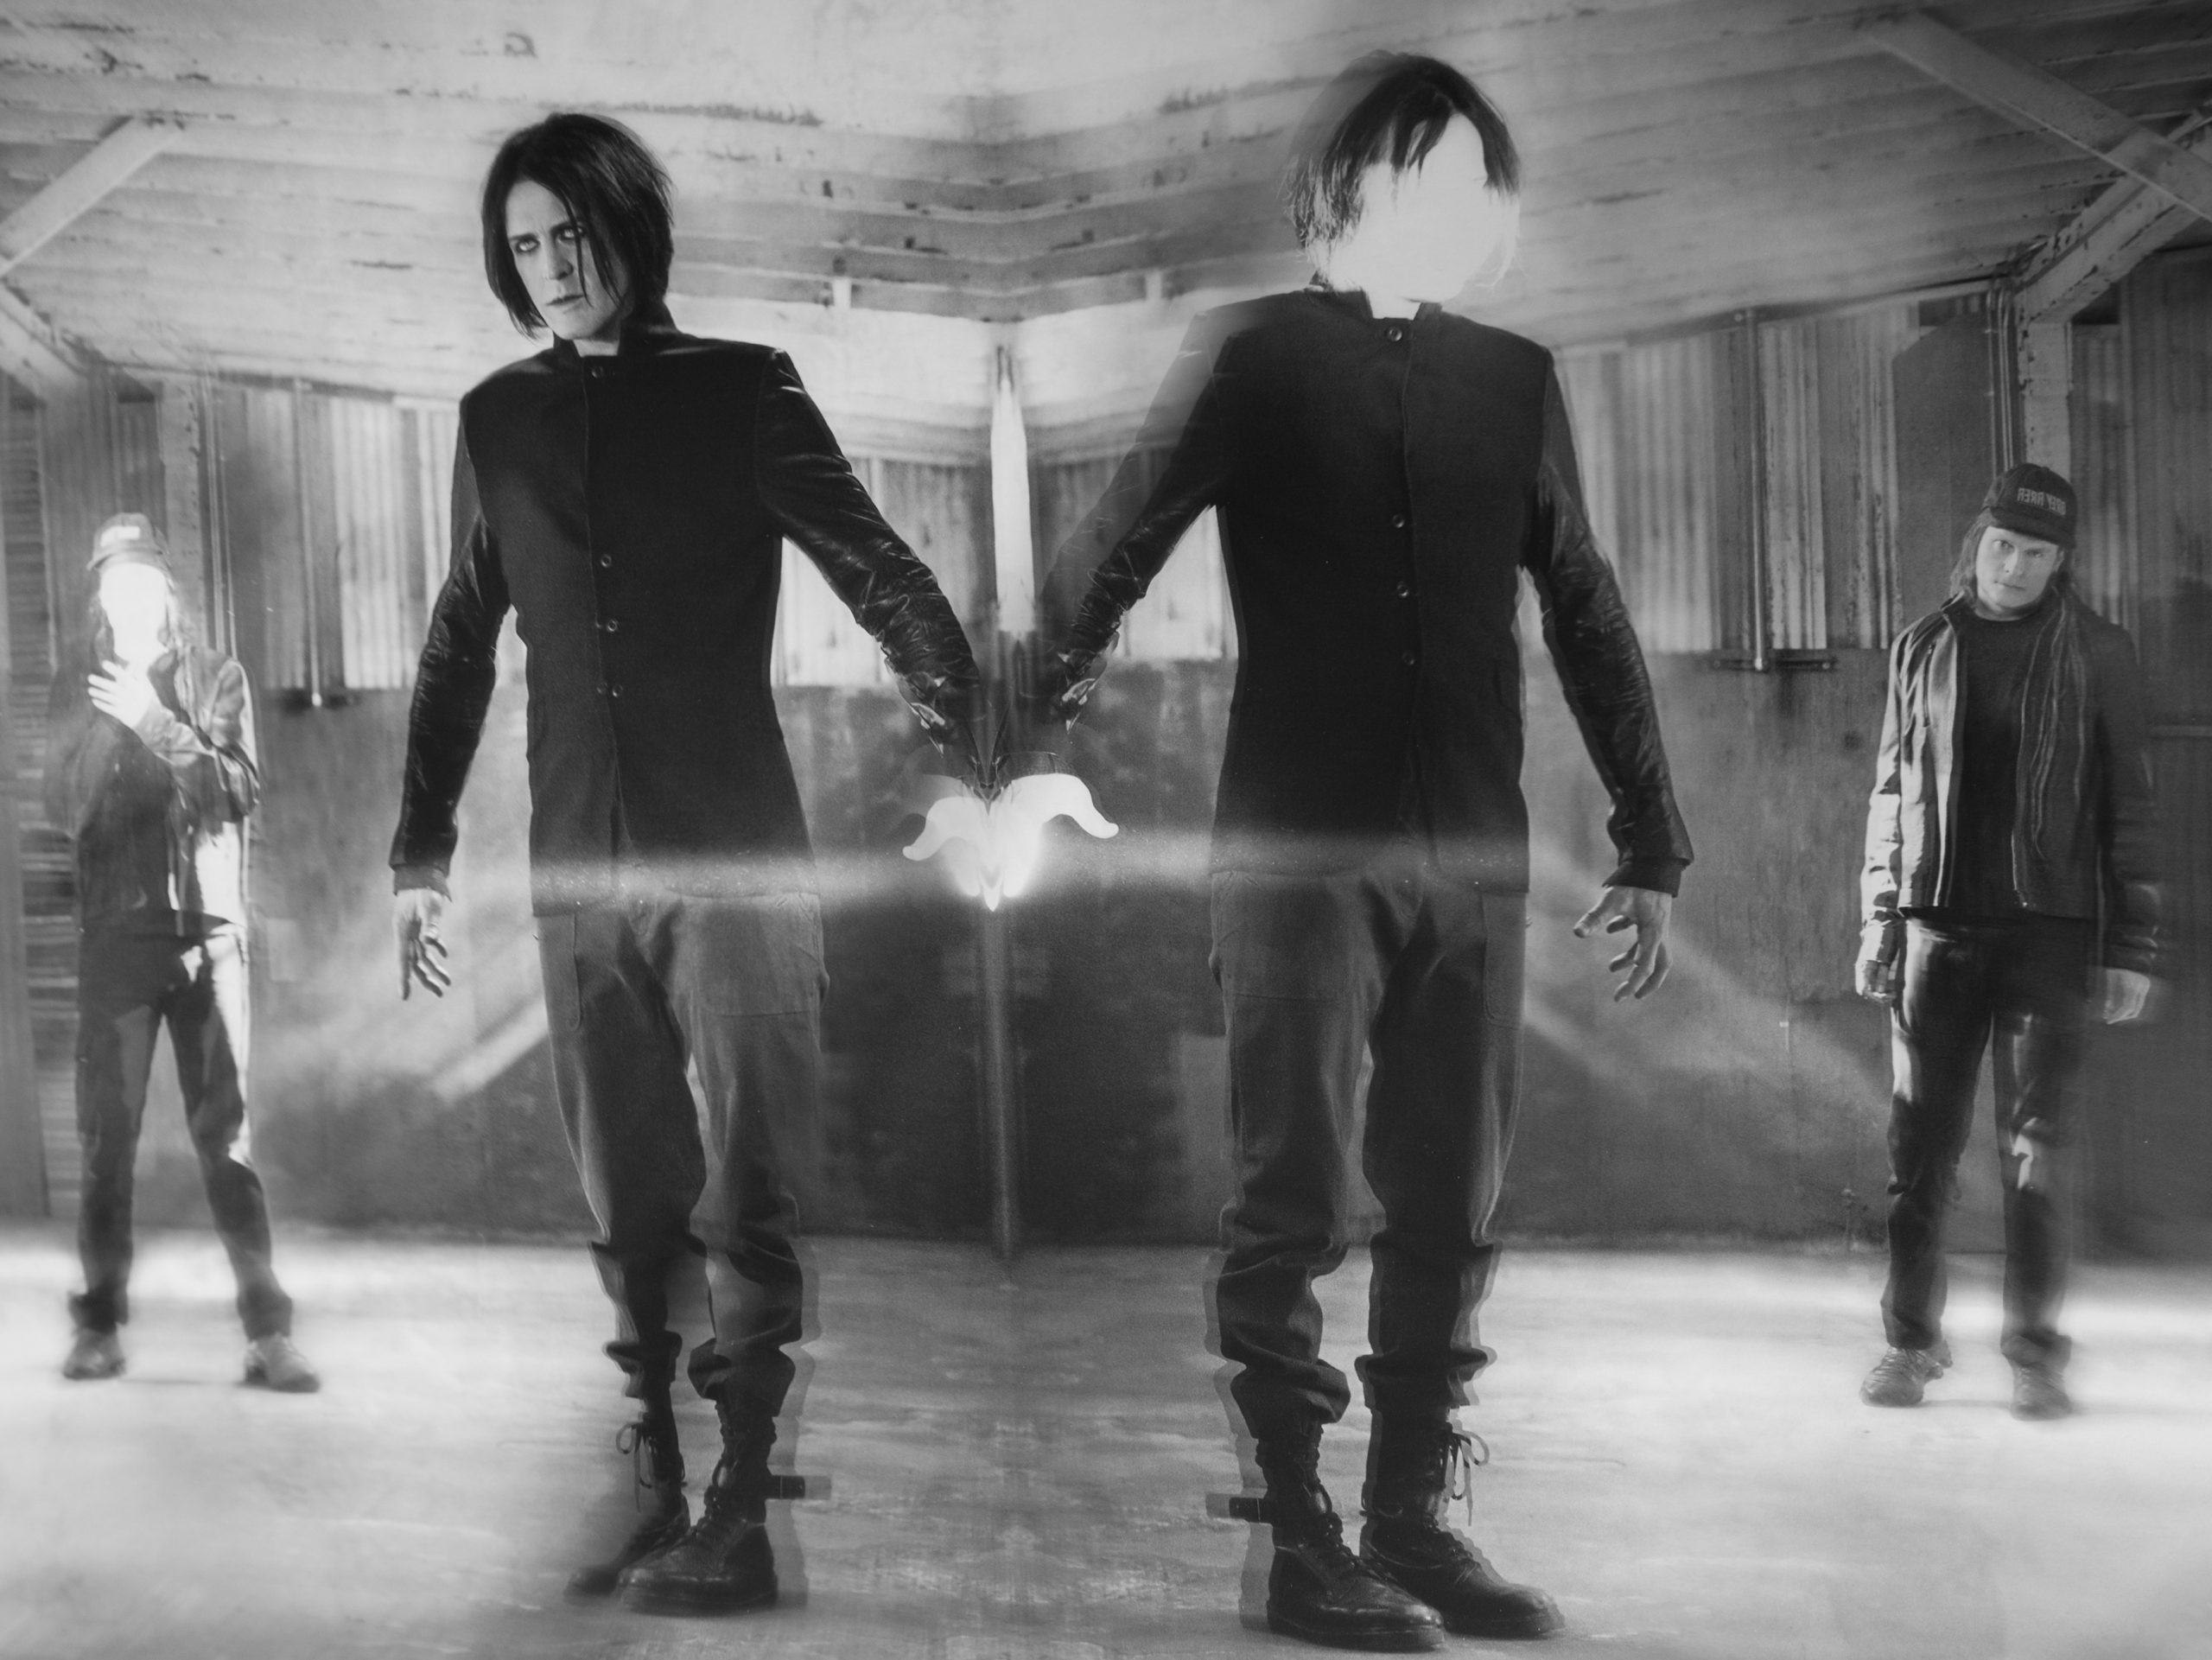 Skinny Puppy's 40th Anniversary Tour Coming to House of Blues in April